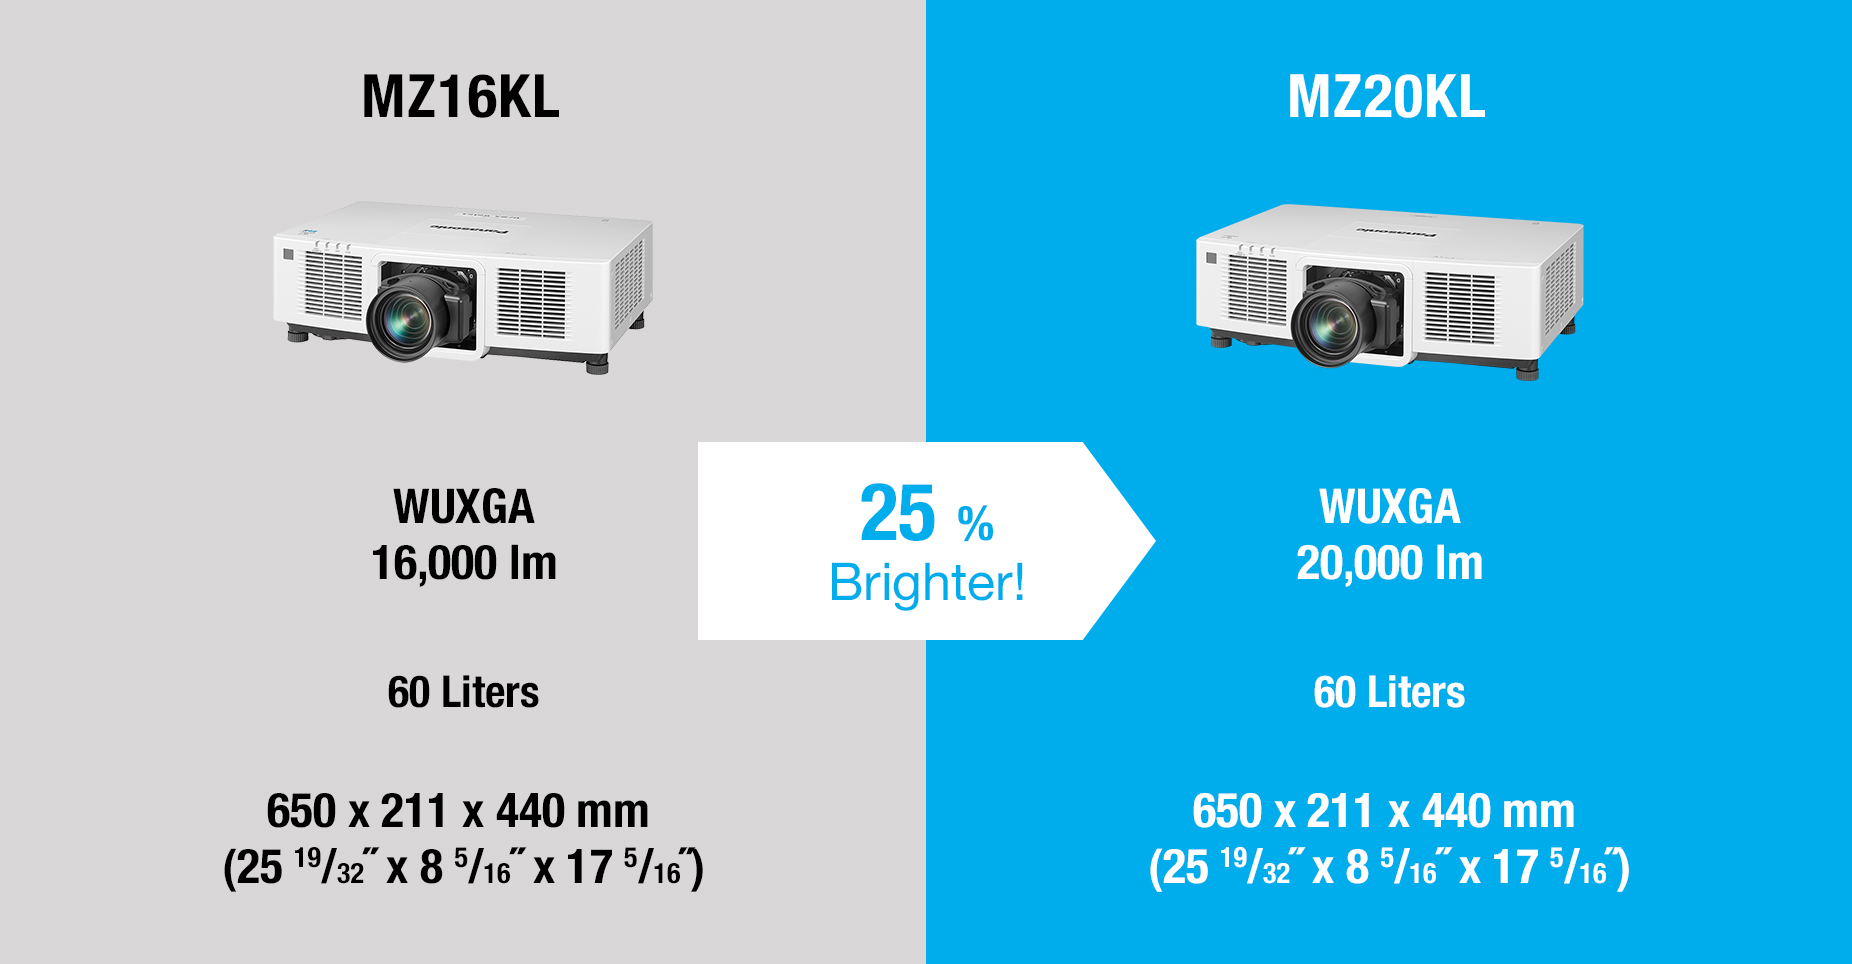 World’s Smallest, Lightest, and Quietest LCD Projector with 20,000 lm